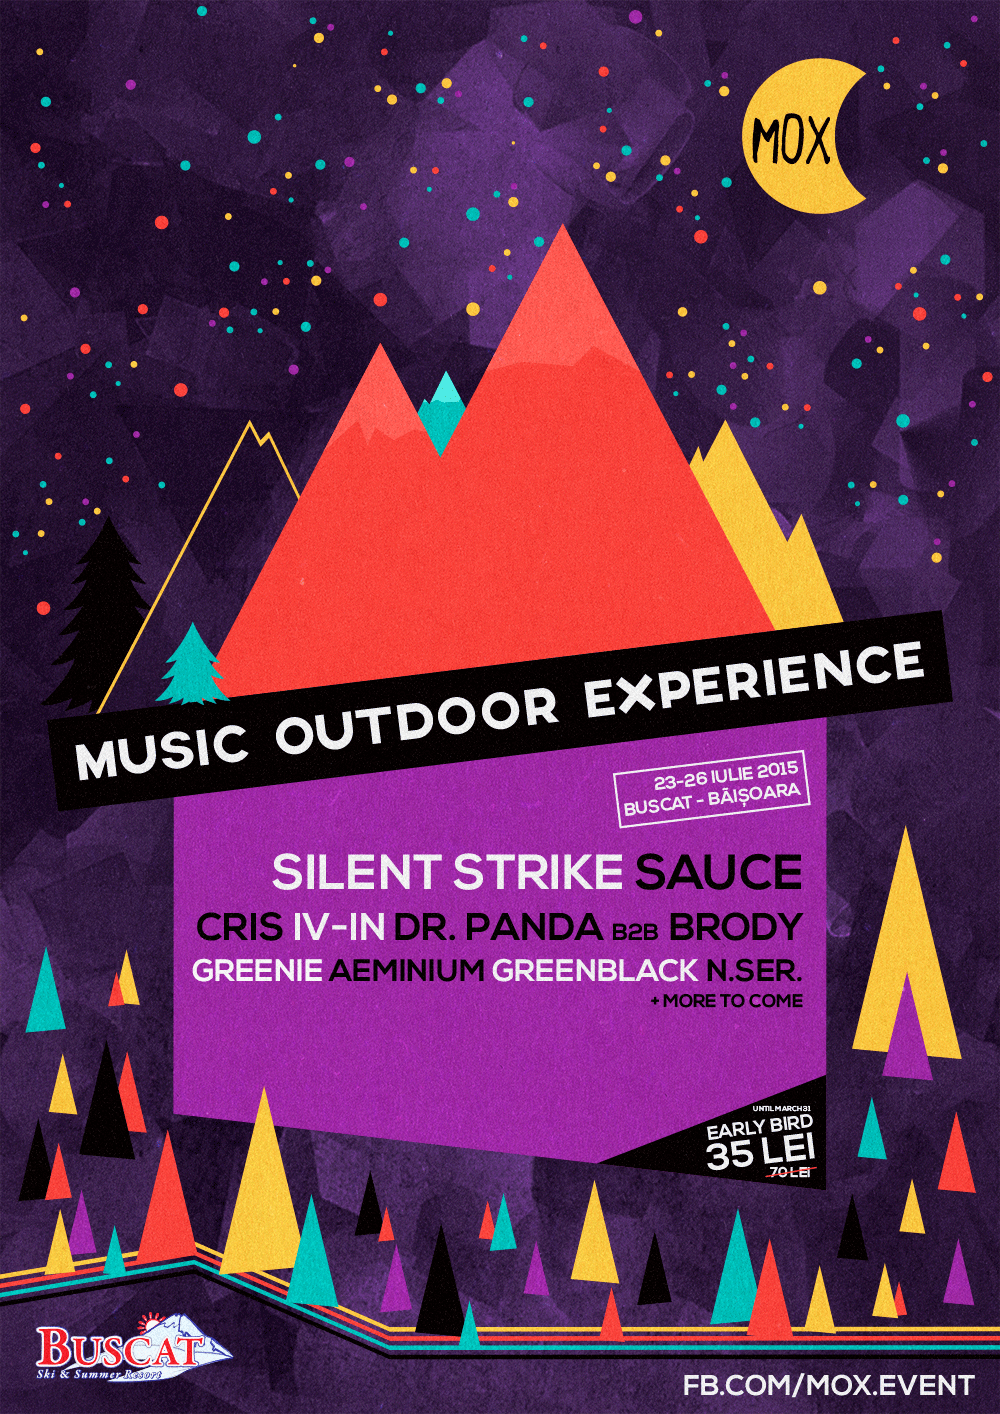 Music Outdoor Experience 2015